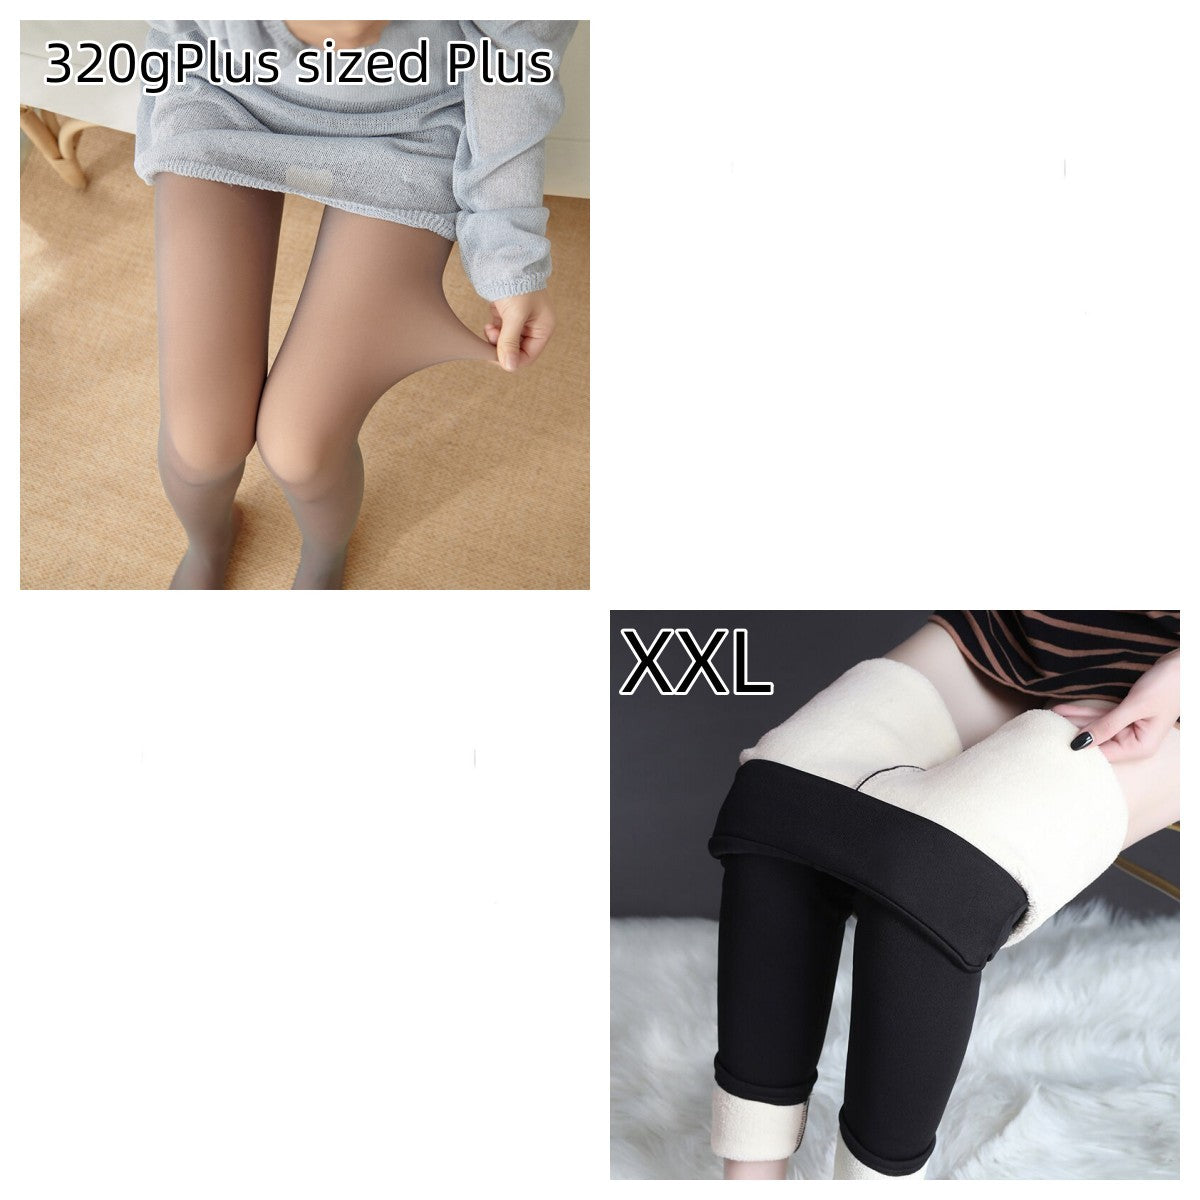 Fleece-lined Thickened Sheer Tights Leggings Transparent One-piece Superb Pantynose